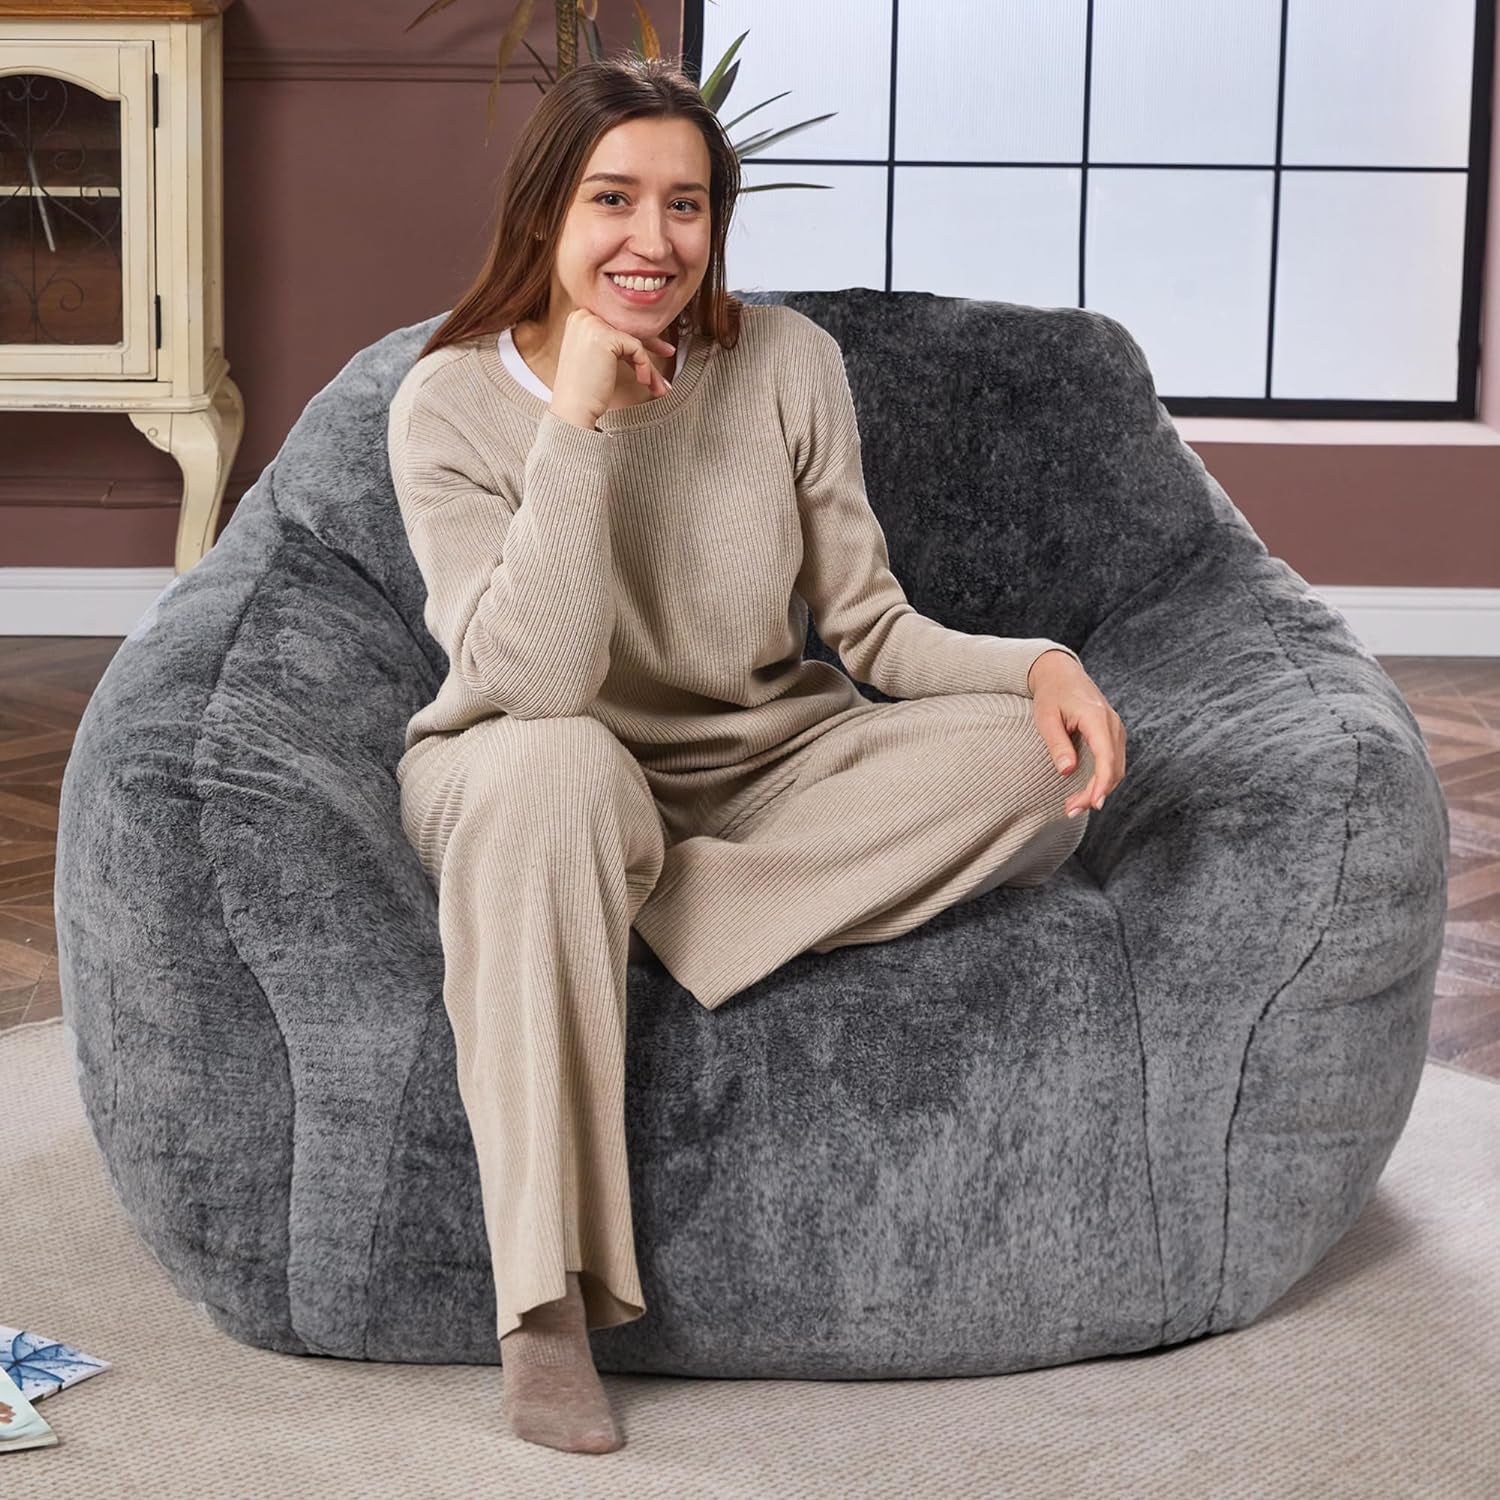 Giant Bean Bag Chair,Bean Bag Sofa Chair with Armrests, Bean Bag Couch Stuffed High-Density Foam, Plush Lazy Sofa Comfy Chair,Large Beanbag Chair for Adults in Livingroom,Bedroom (Grey)